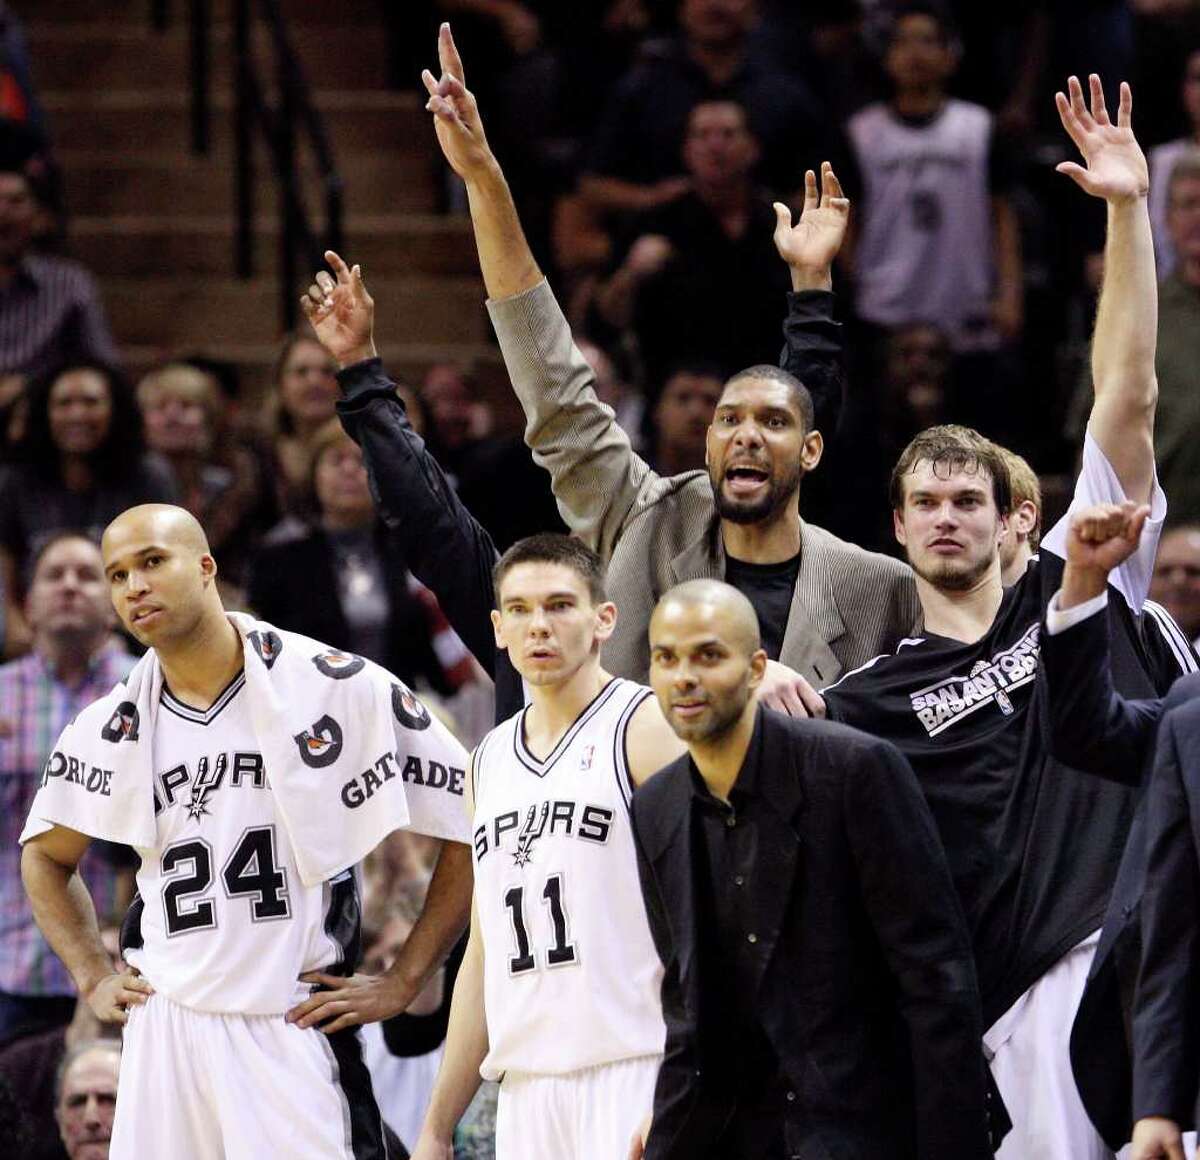 FOR SPORTS - Spurs' Richard Jefferson (from left), Chris Quinn, Tony Parker, Tim Duncan and Tiago Splitter watch second half action from the bench against the Trail Blazers Monday March 28, 2011 at the AT&T Center. The Trail Blazers won 100-92. (PHOTO BY EDWARD A. ORNELAS/eaornelas@express-news.net)